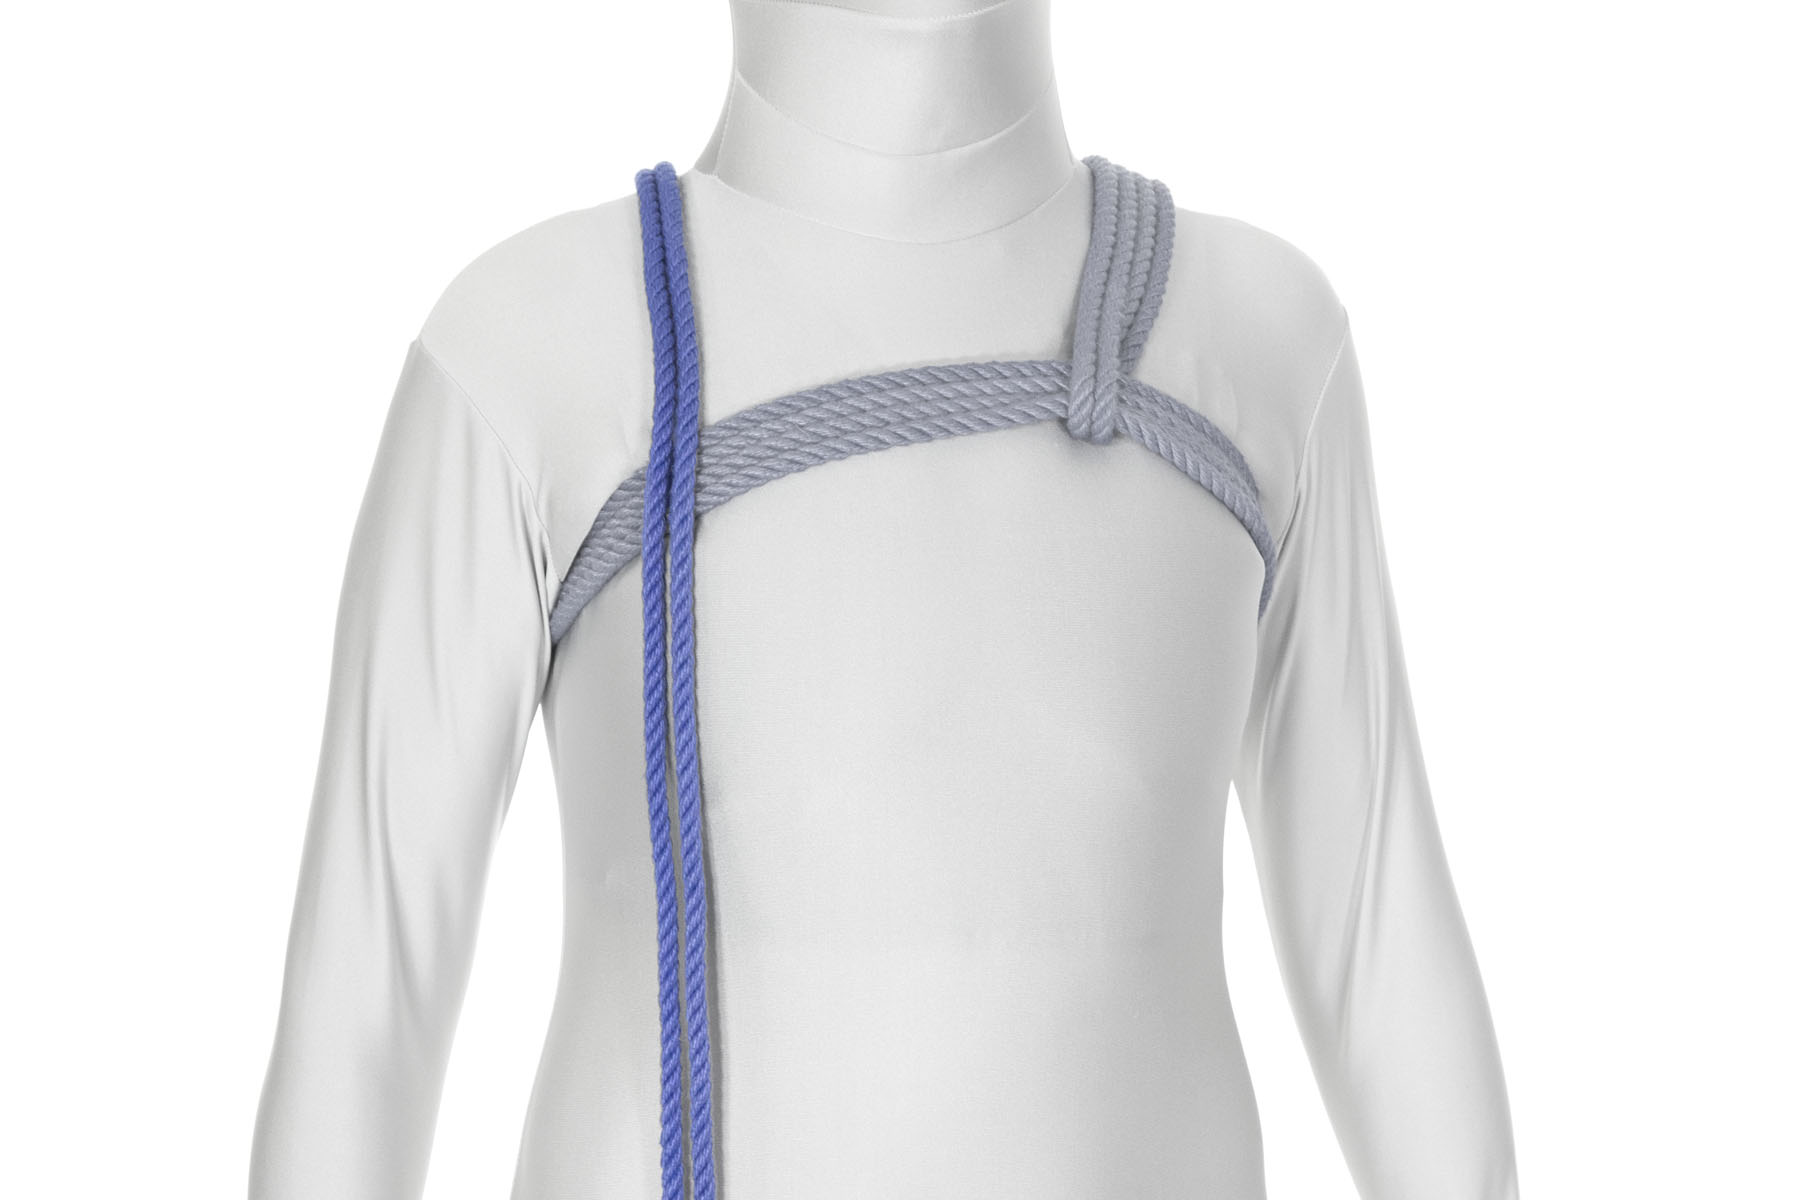 This is a front view of the rope coming over the right shoulder and passing over the chest wraps.